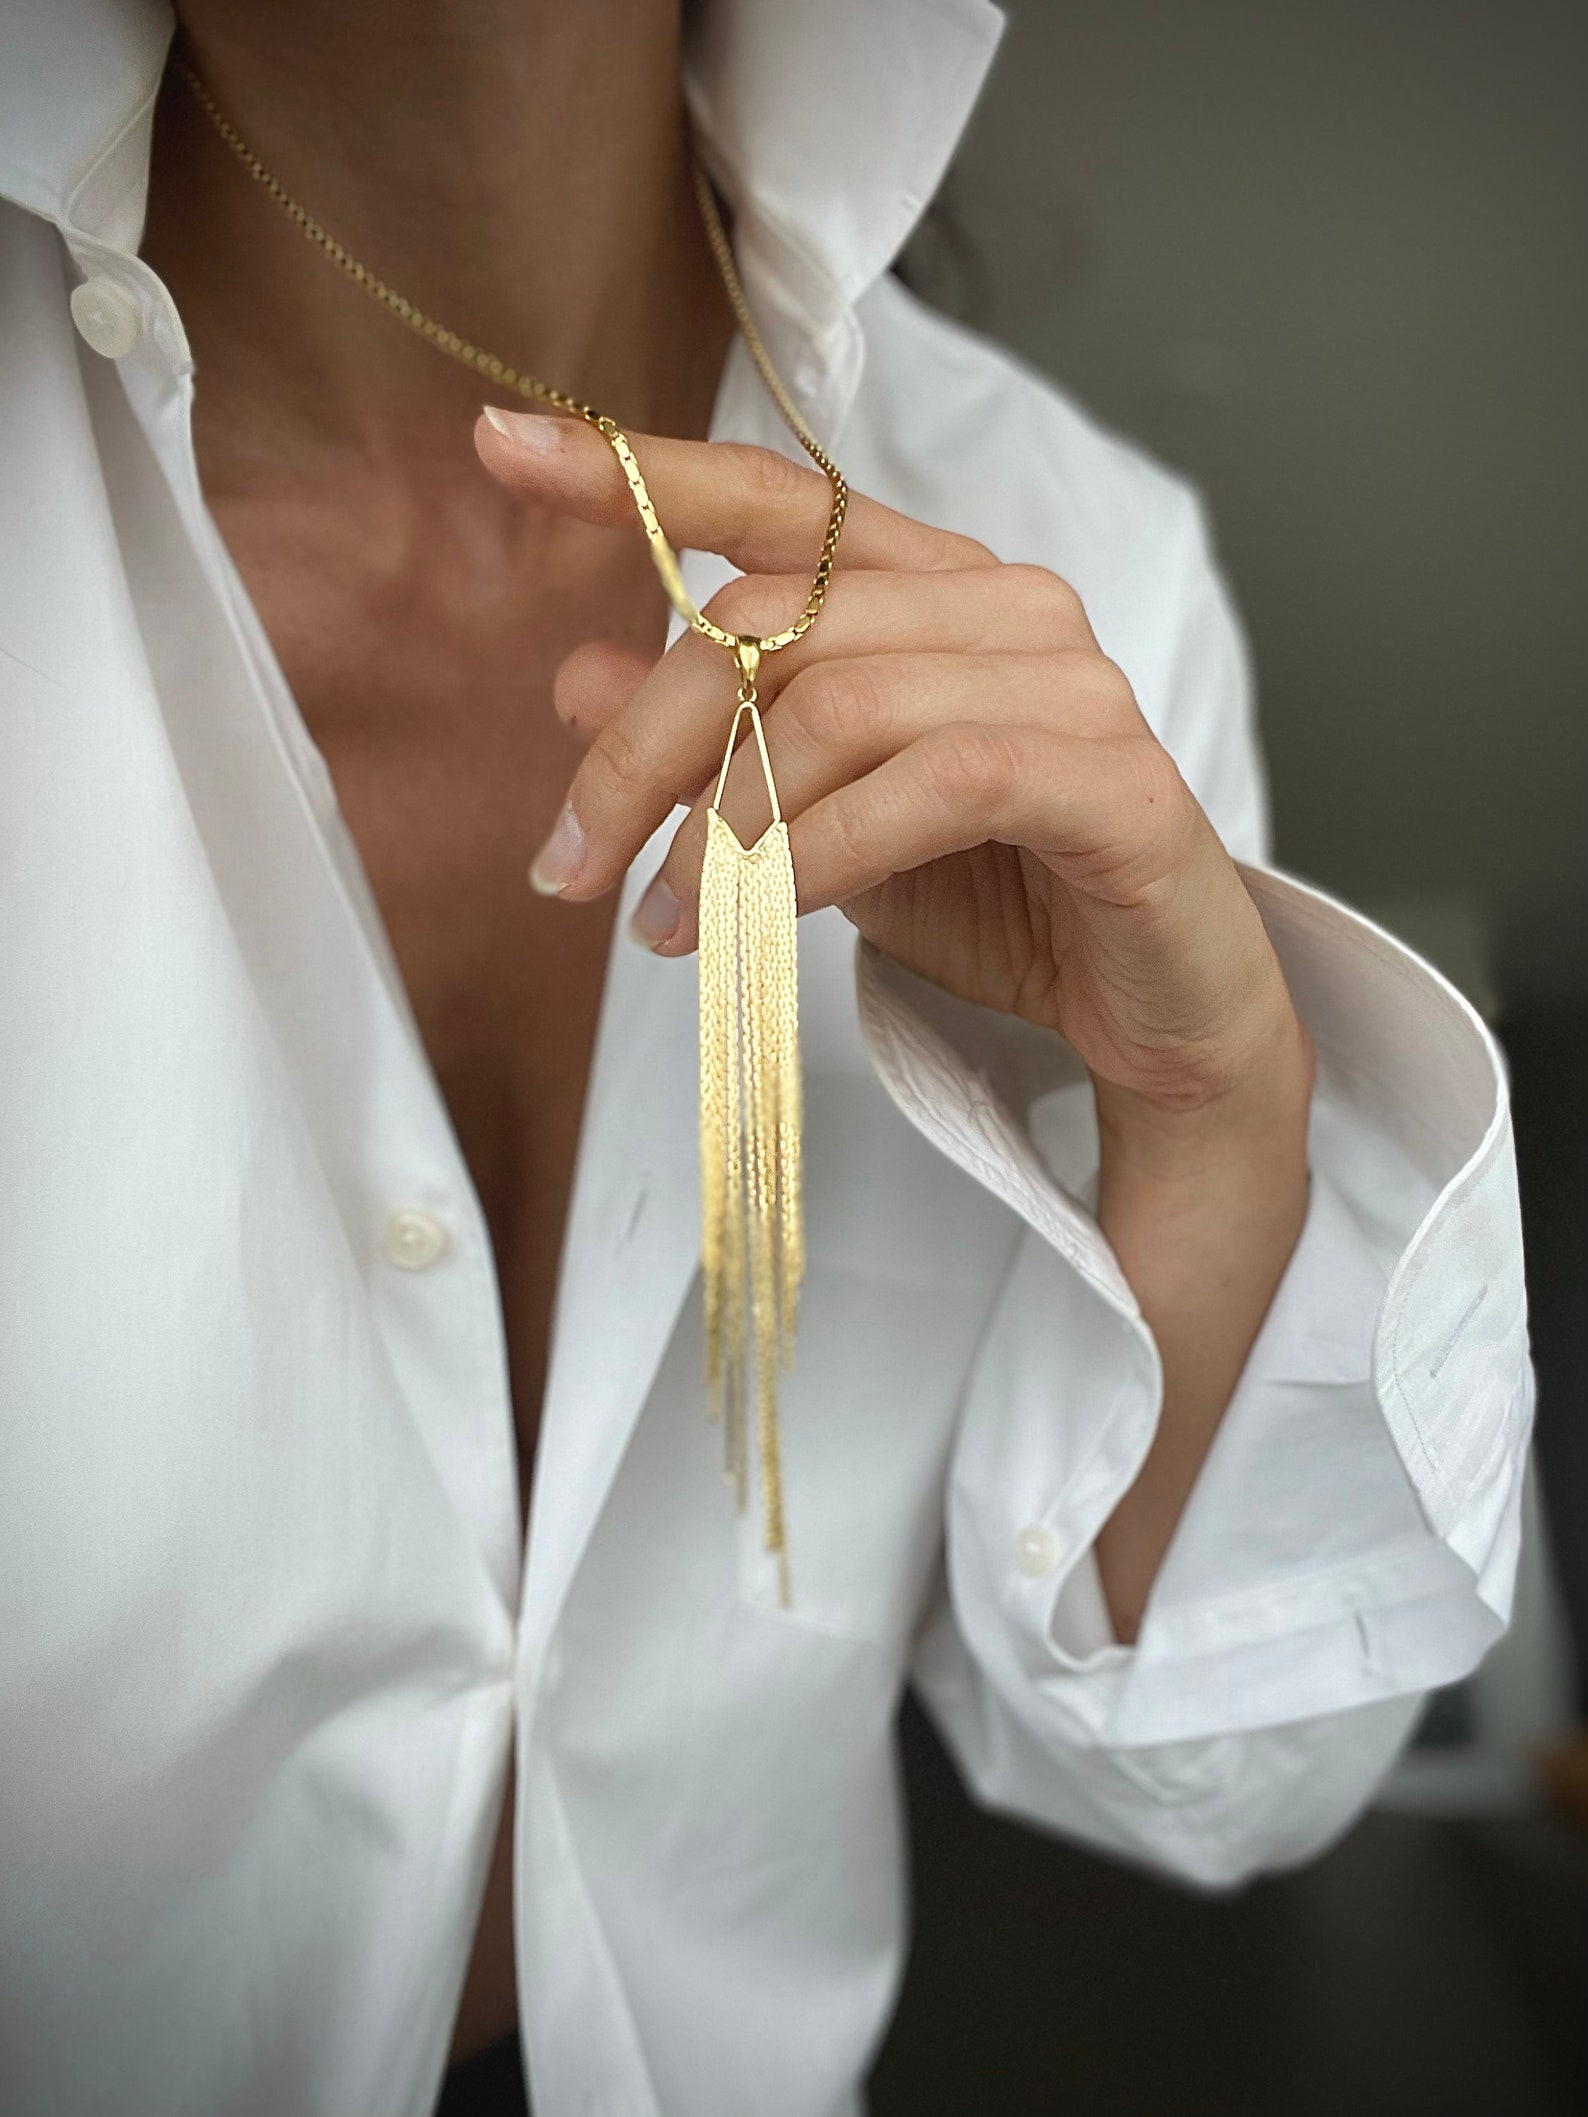 Simple yet gorgeous necklace with gold color chain and tassels¿.